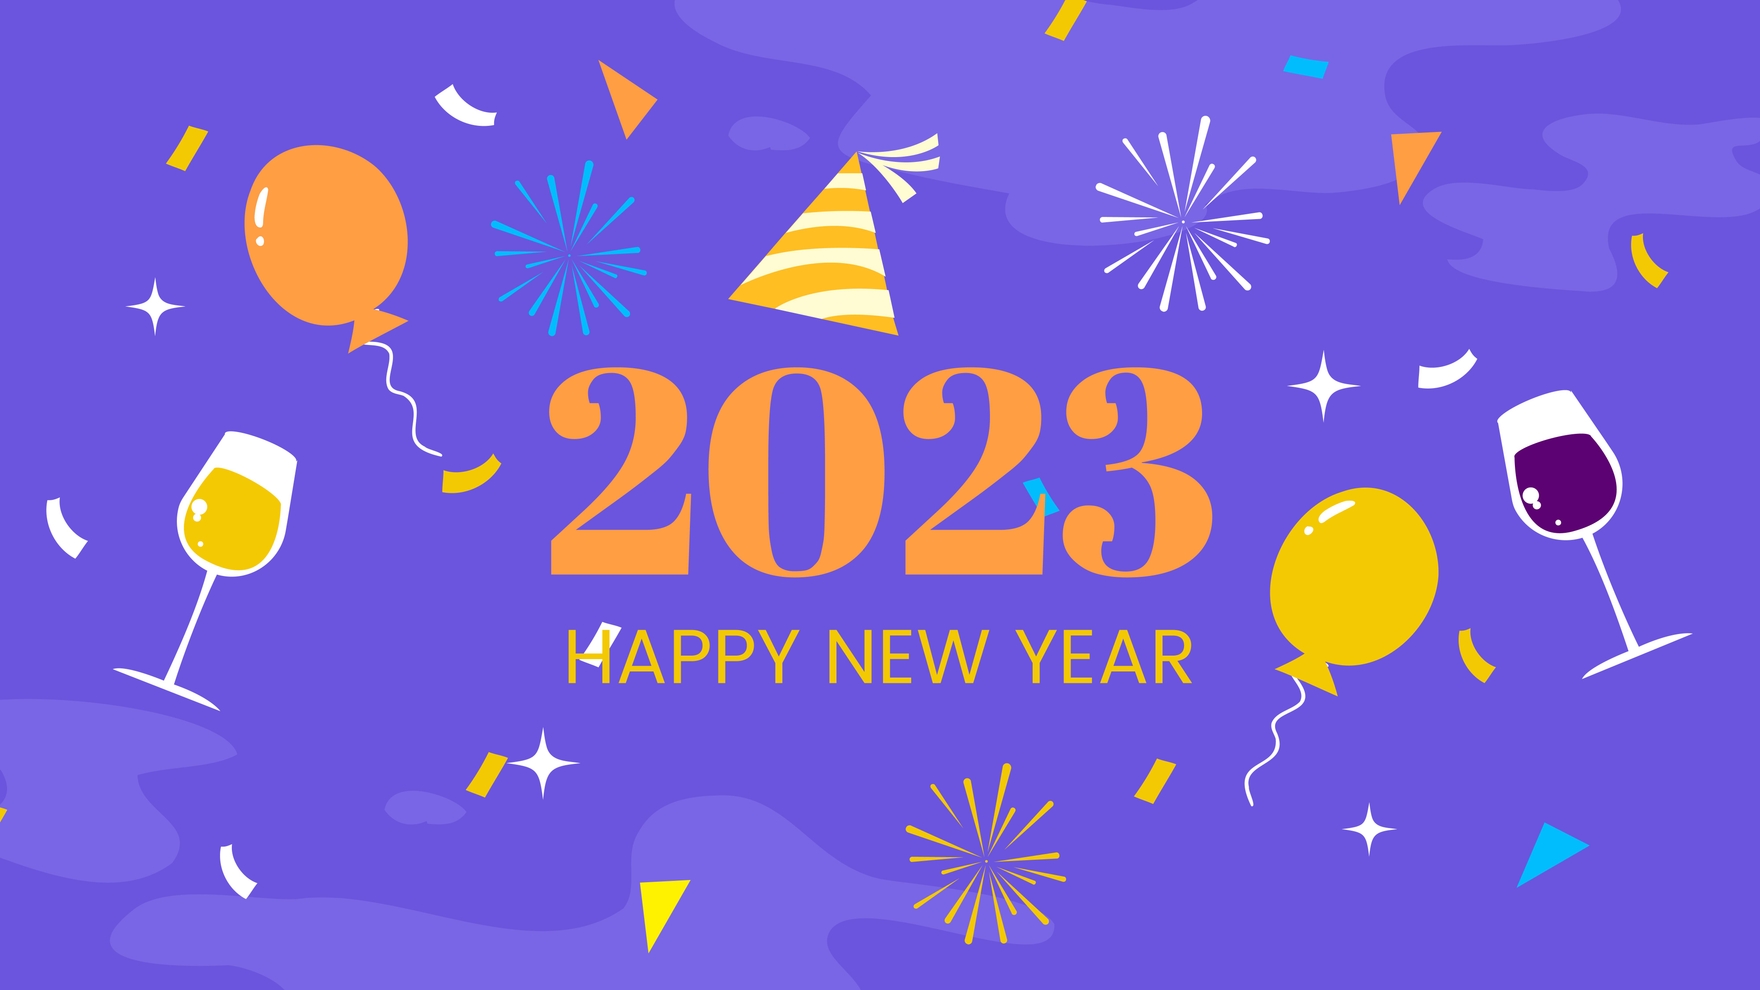 Free New Year's Day Design Background in PDF, Illustrator, PSD, EPS, SVG, PNG, JPEG